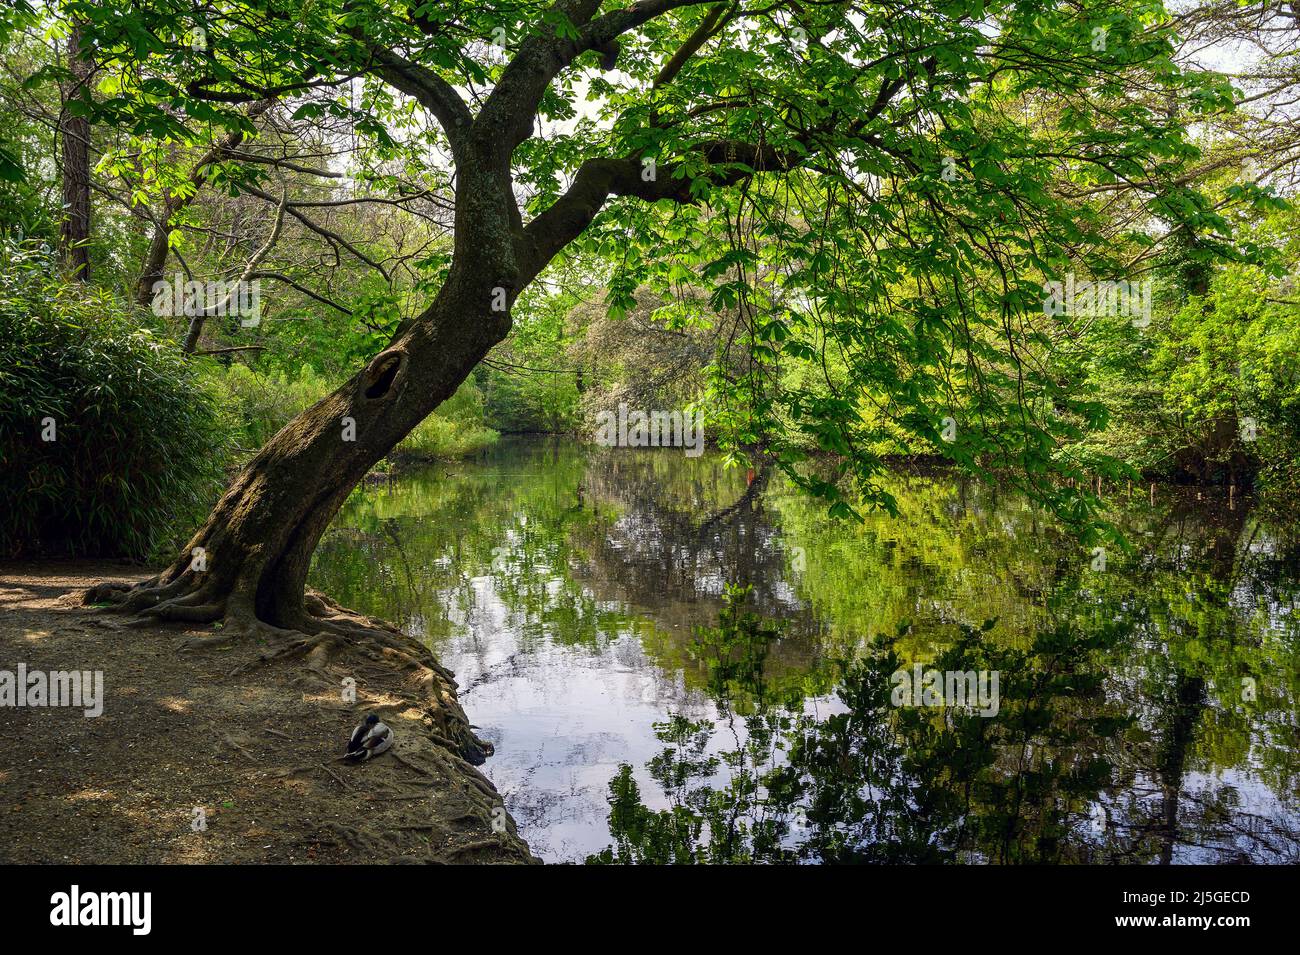 Dulwich Village, London, UK: Belair Park, a public park in Dulwich Village, south London. View of the small lake surrounded by trees with a duck. Stock Photo